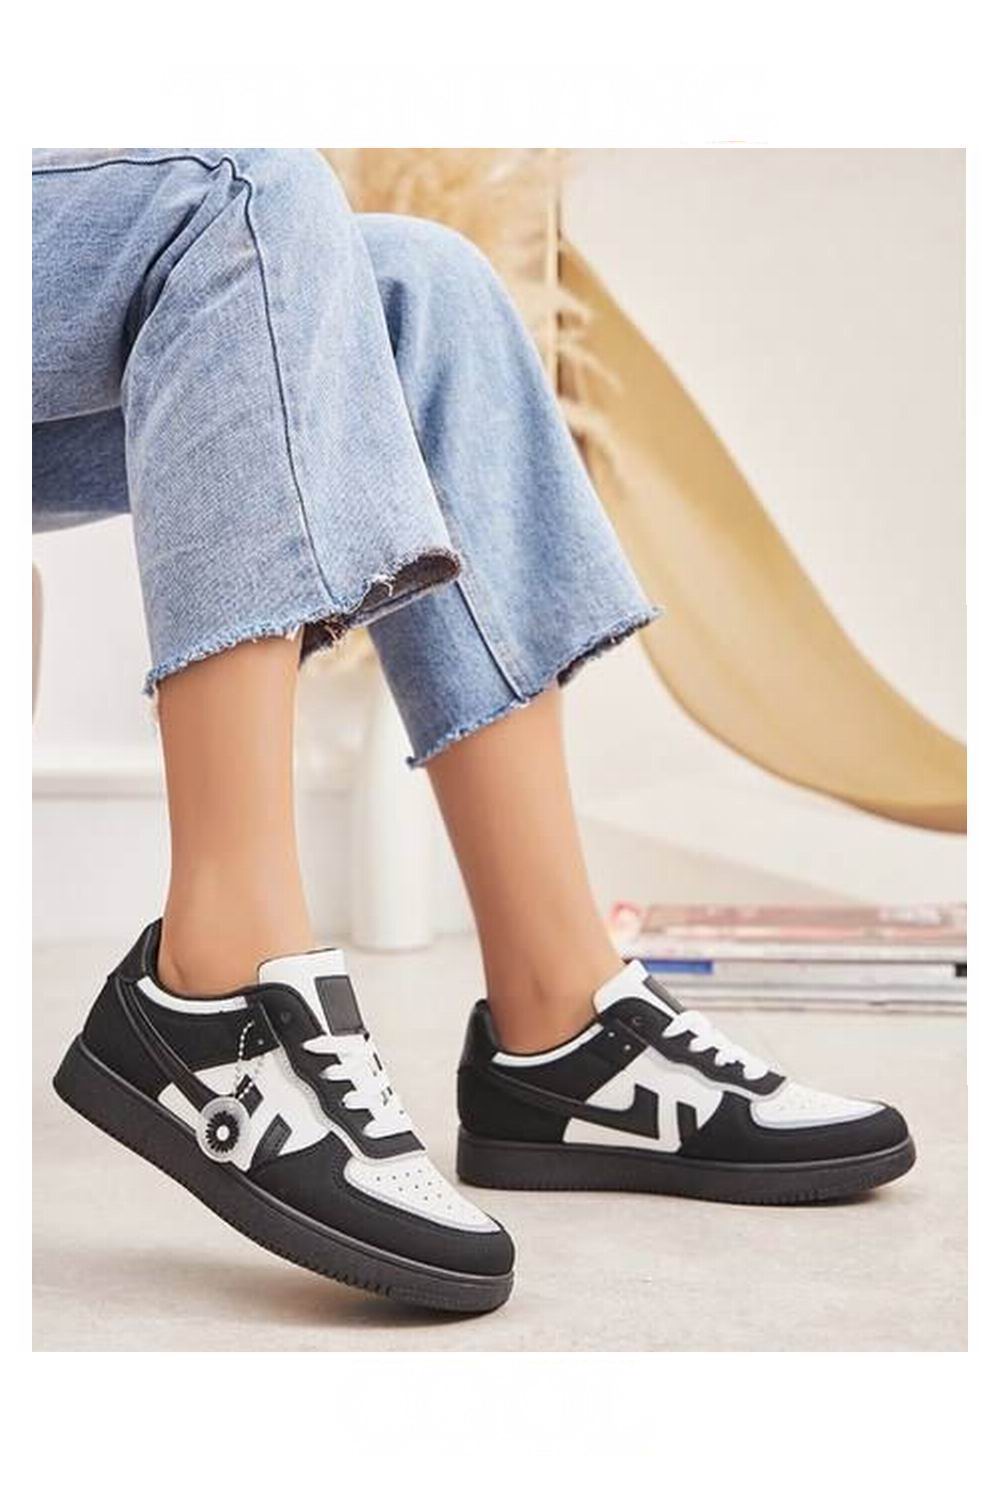 BLACK WHITE LACE UP FLAT TRAINERS